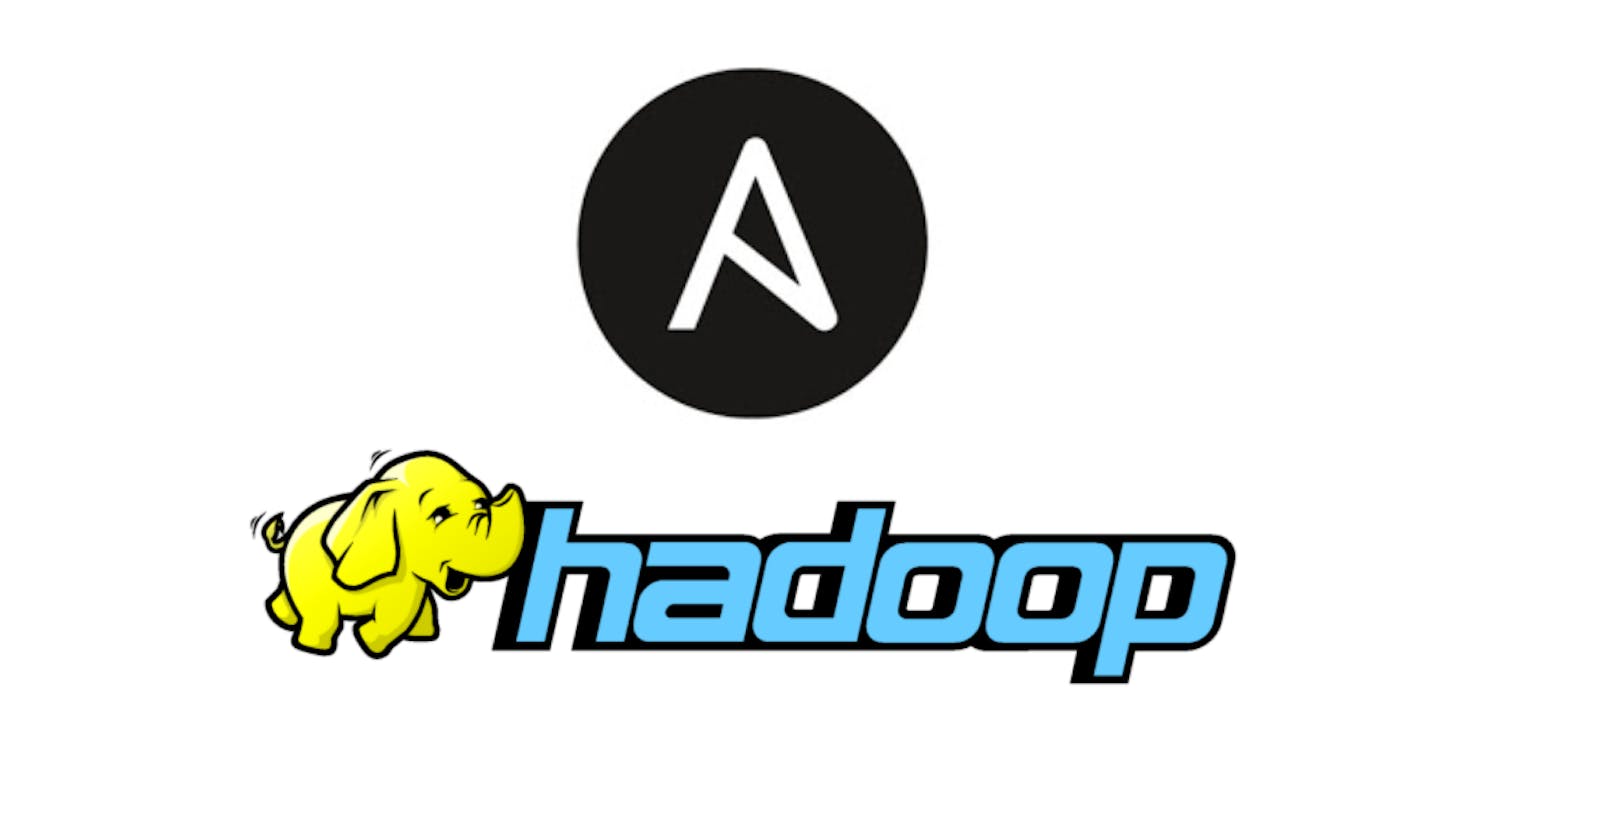 Configuring Hadoop cluster using Ansible